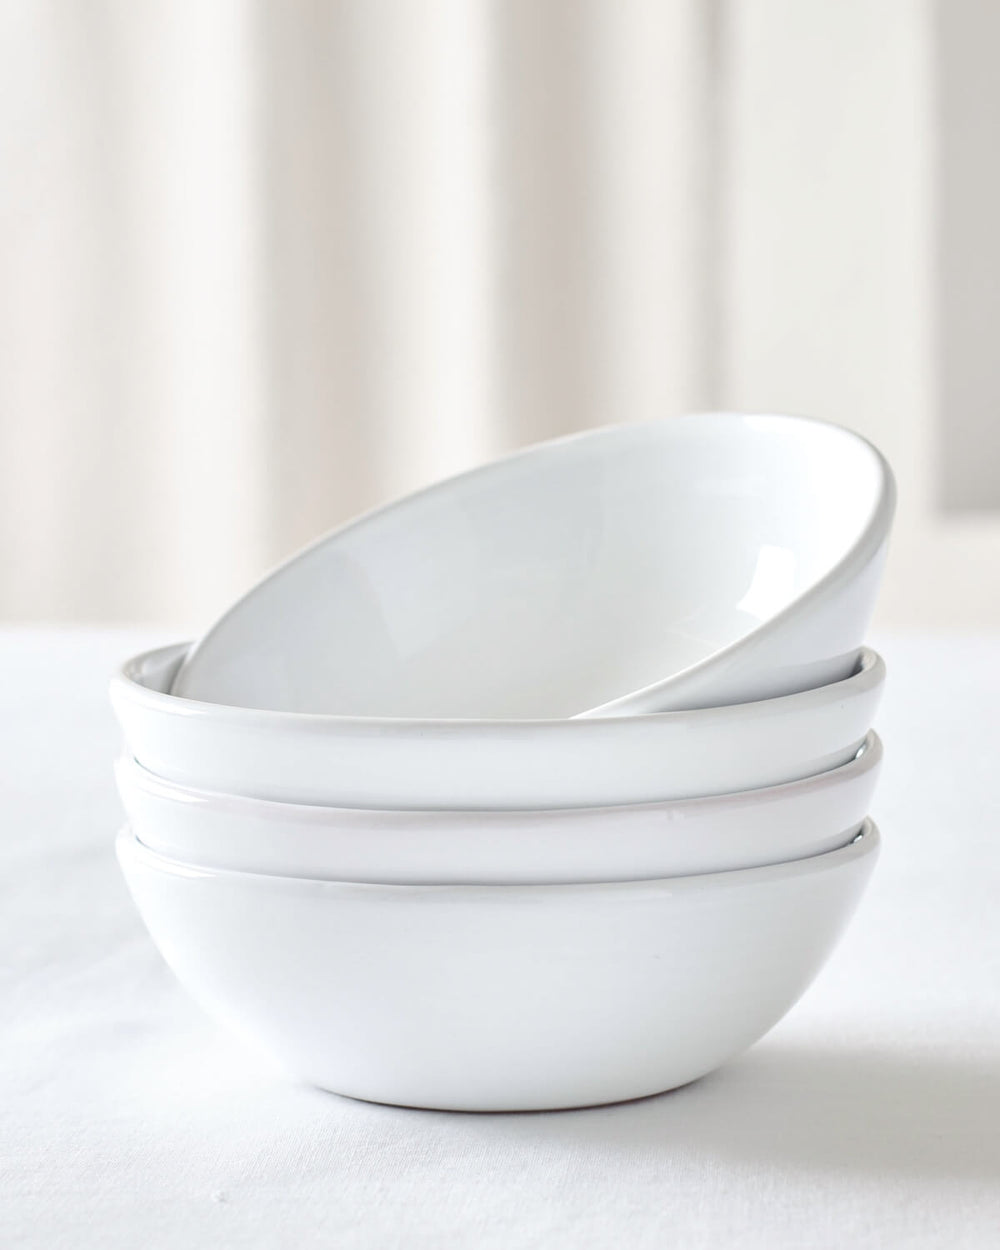 Khira Soup Bowls by Fairkind stacked on white table. Modern, white ceramic dinnerware.